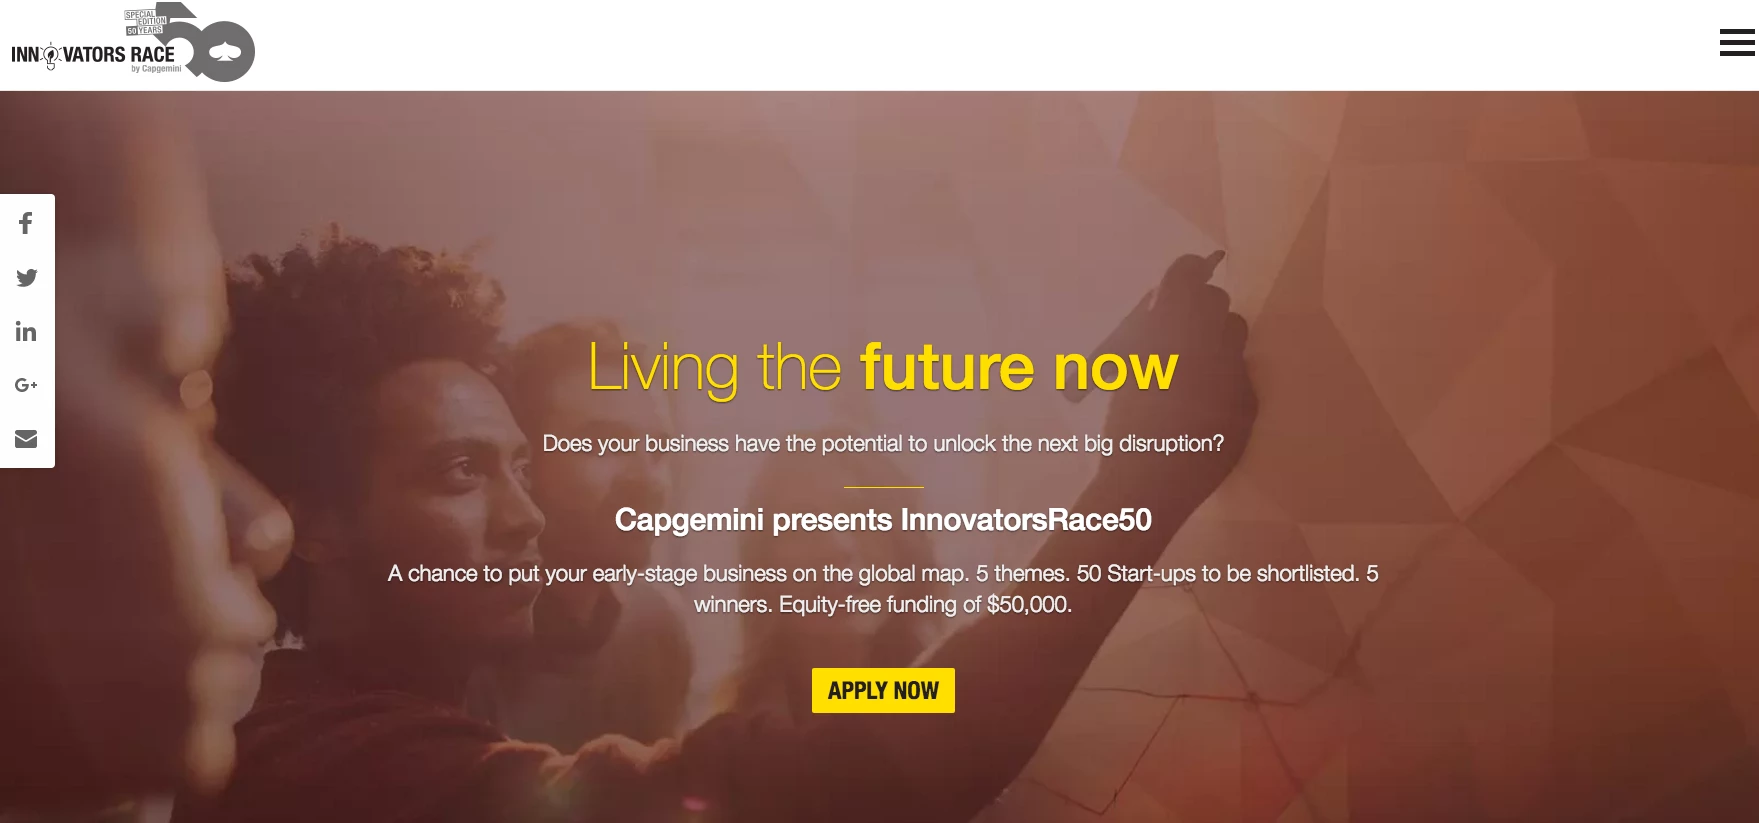 Capgemini has launched its Innovators Race competition today.